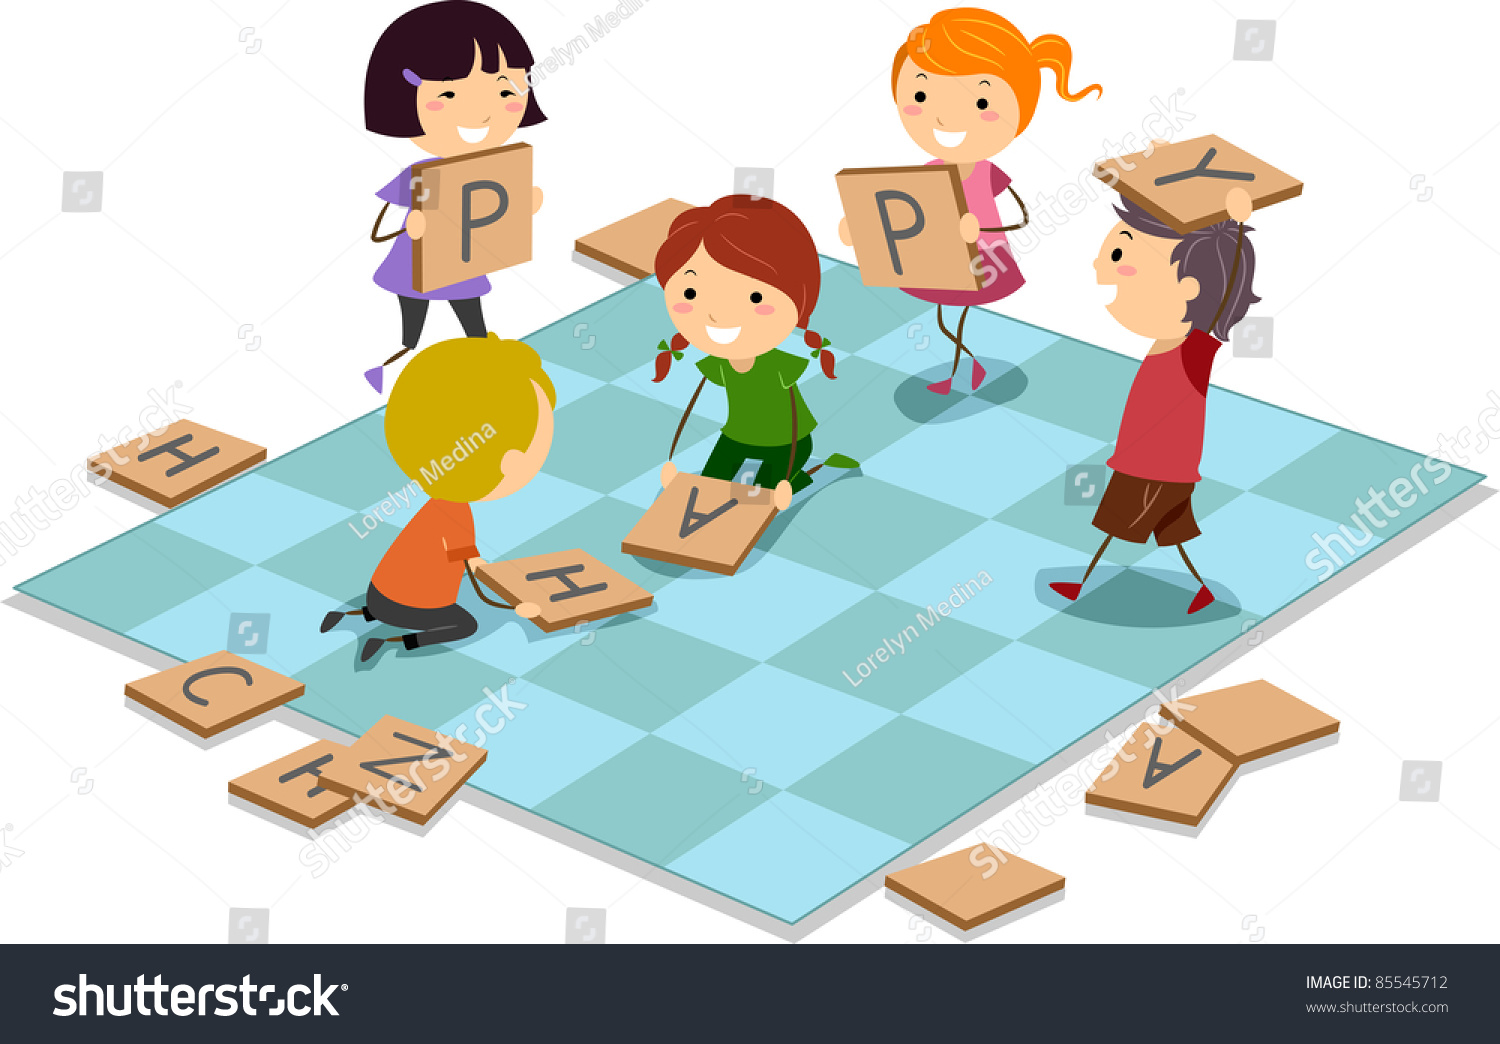 play games clipart - photo #47